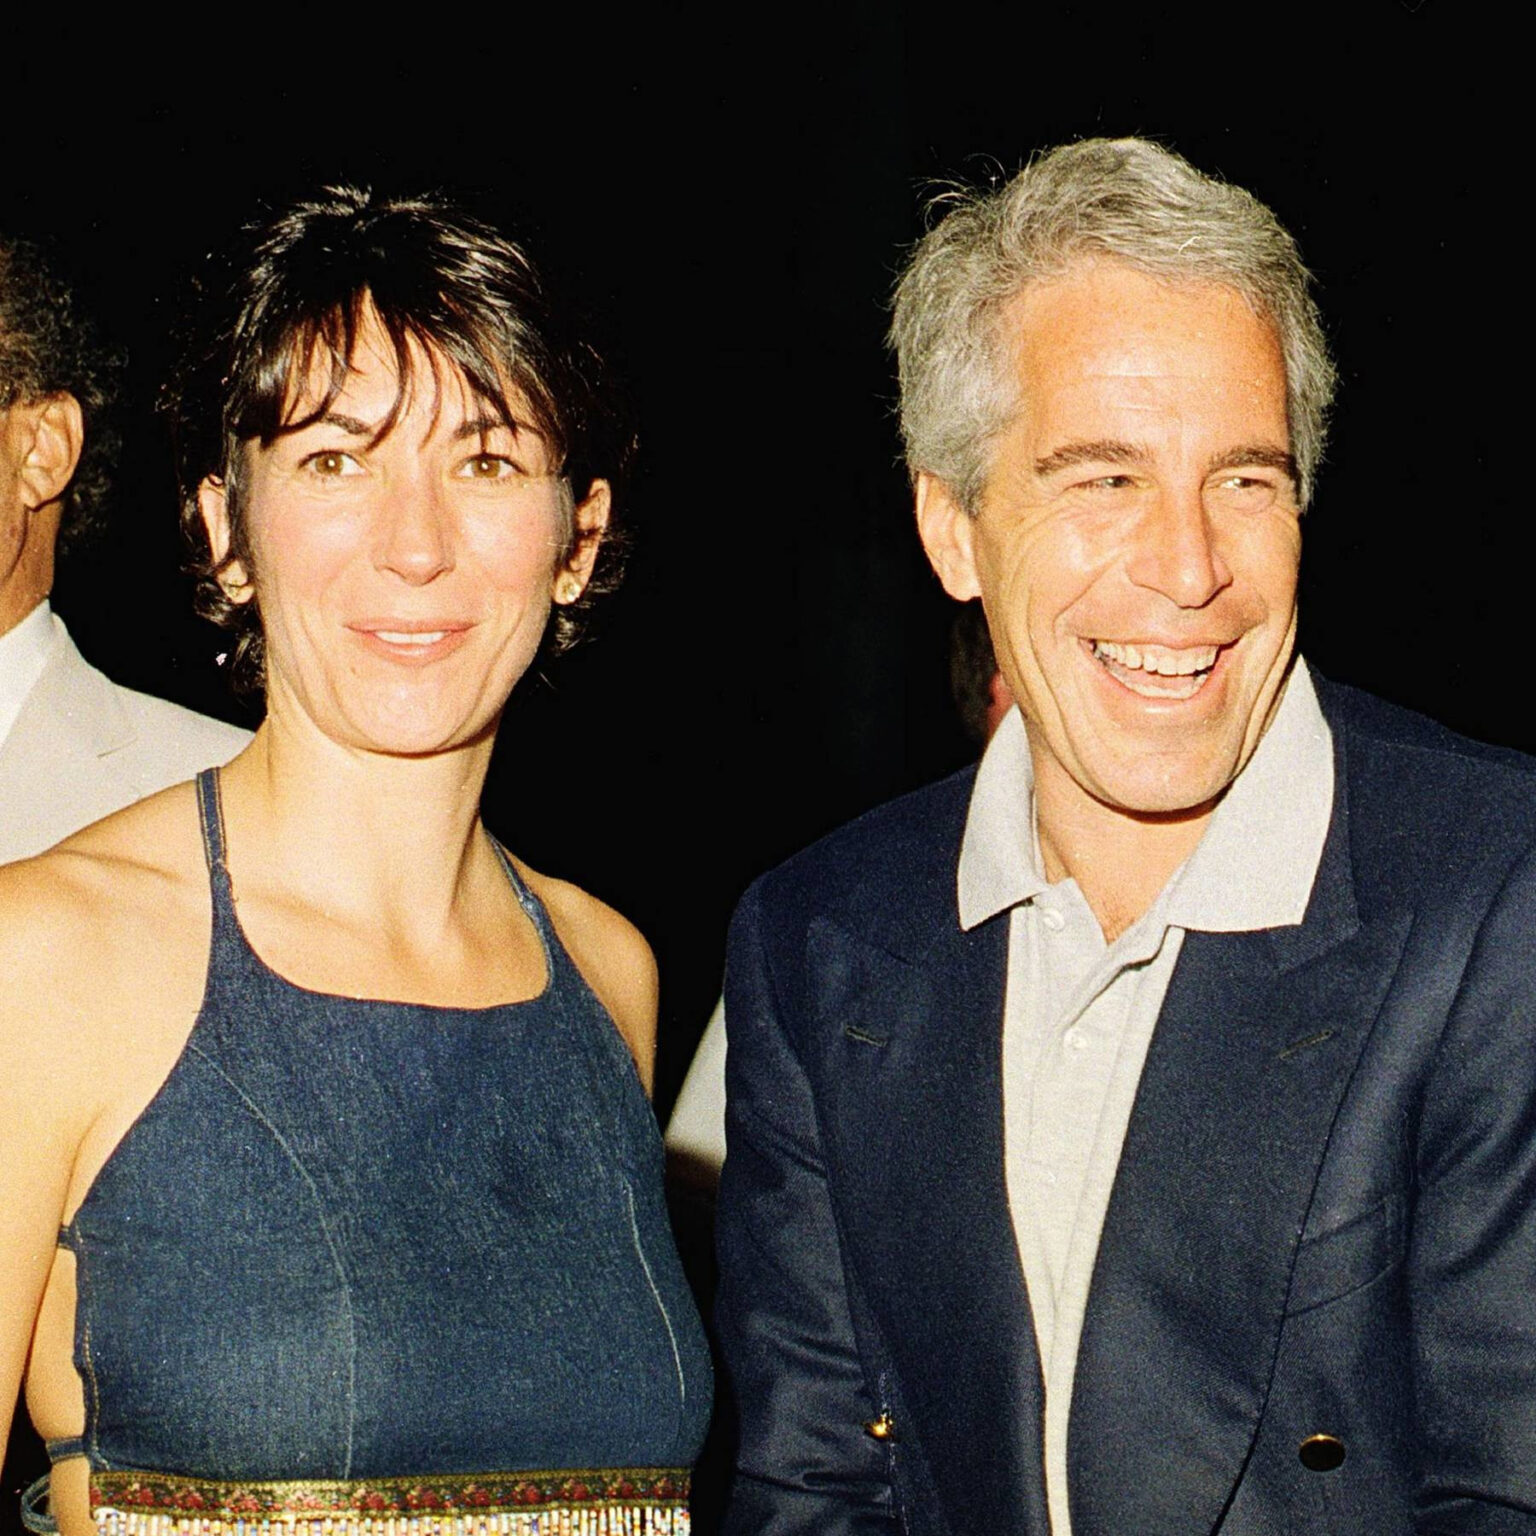 When will the next batch of documents about the Jeffrey Epstein case drop? Walk through the legal process that the court outlined for releasing new info.